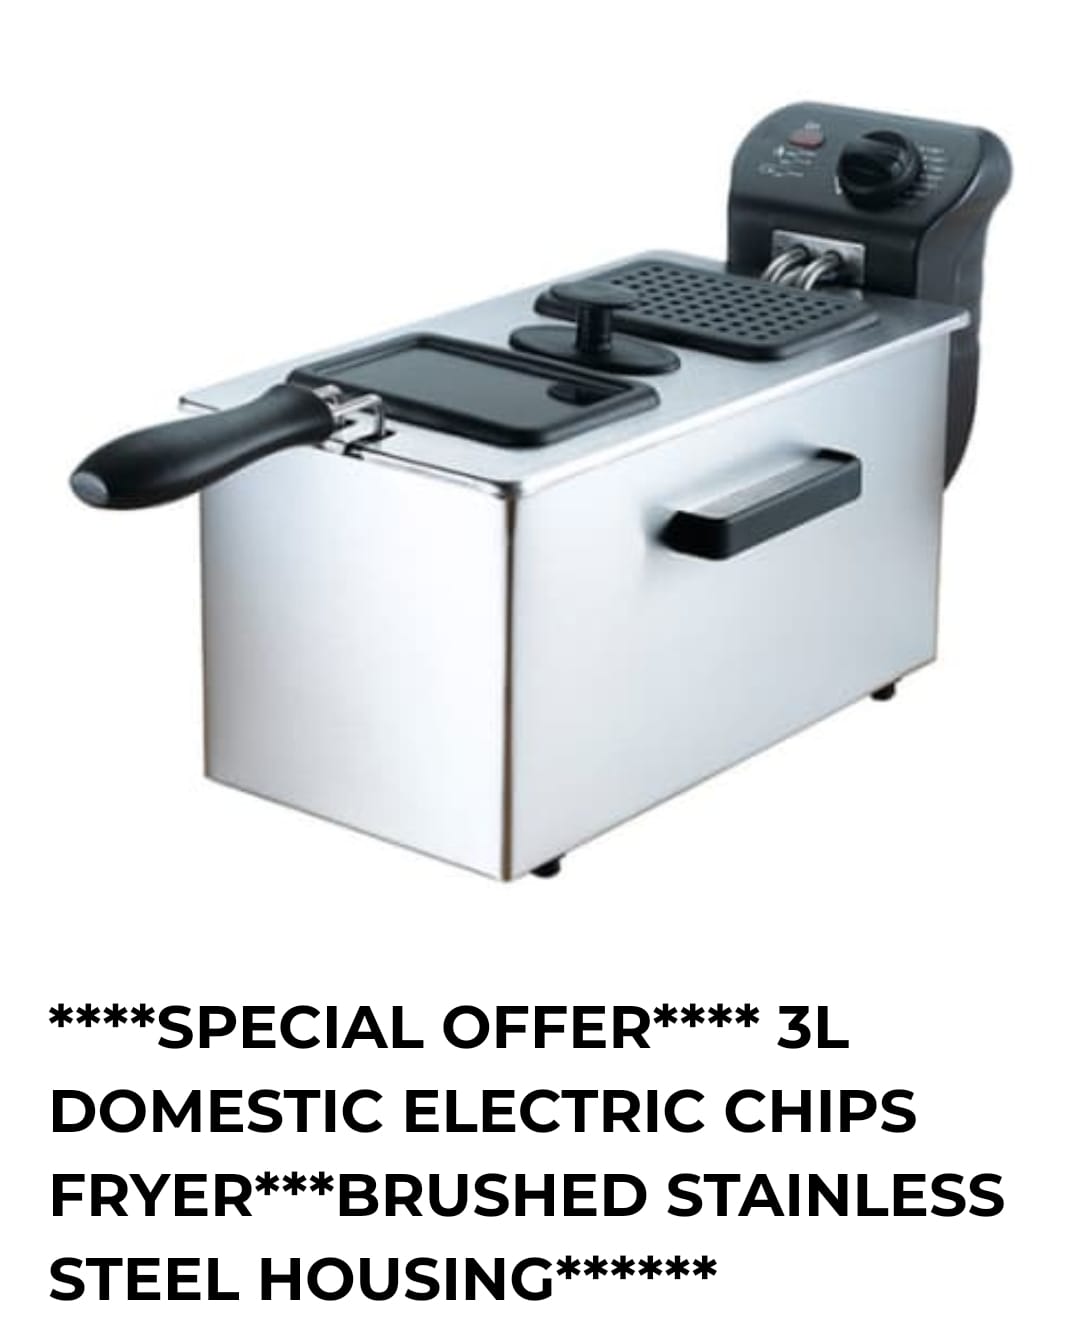 Domestic Electric Chips Fryer, 3L